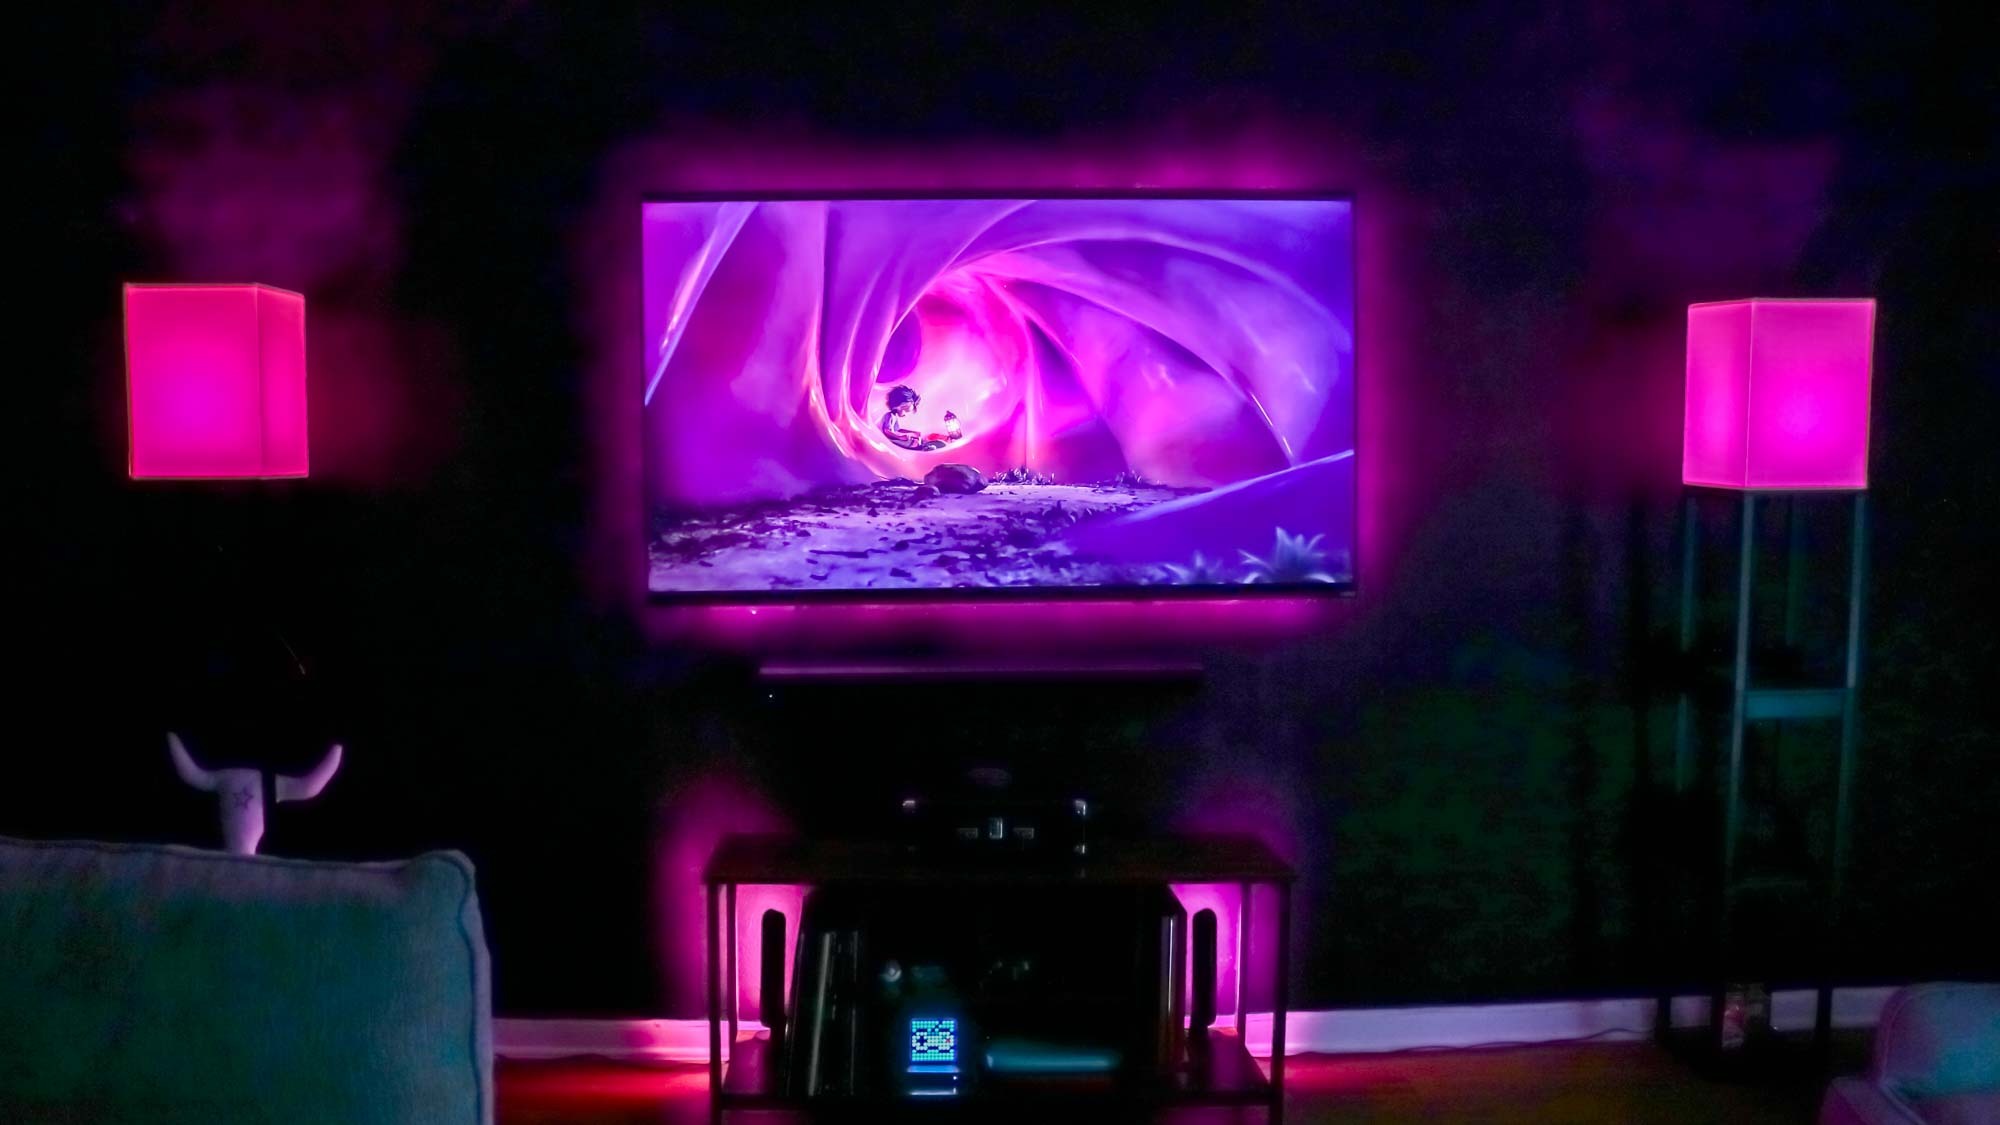 A TV showing The Sea Beast with Philips Hue Sync running